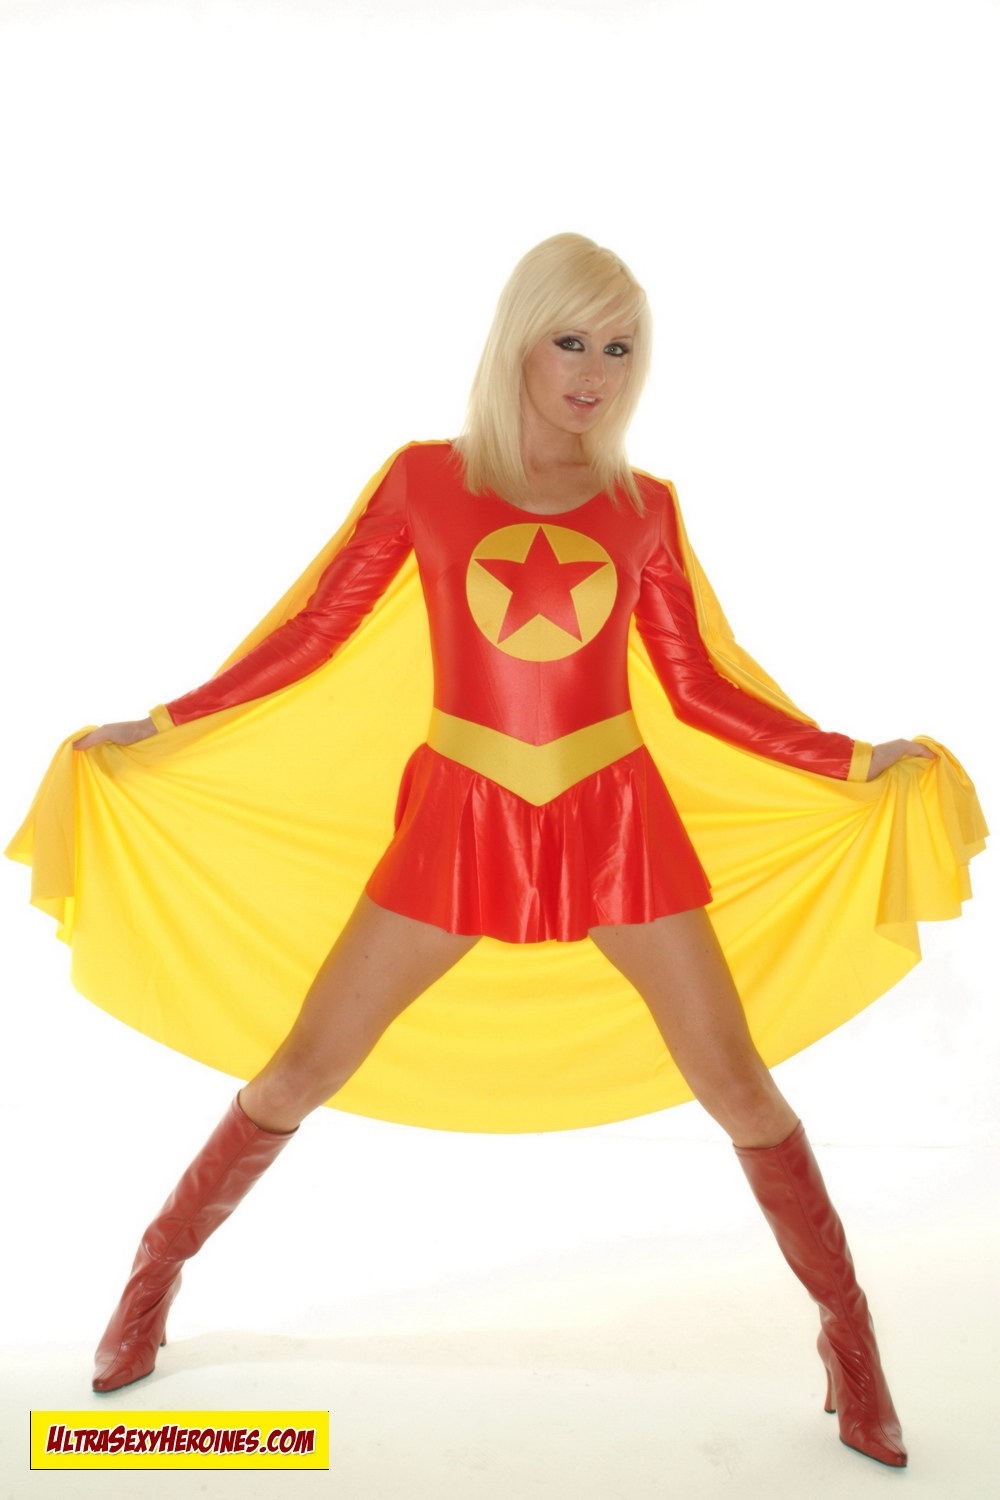 [UltraSexyHeroines] Sexy Blonde Super Heroine Cosplay Nude 140